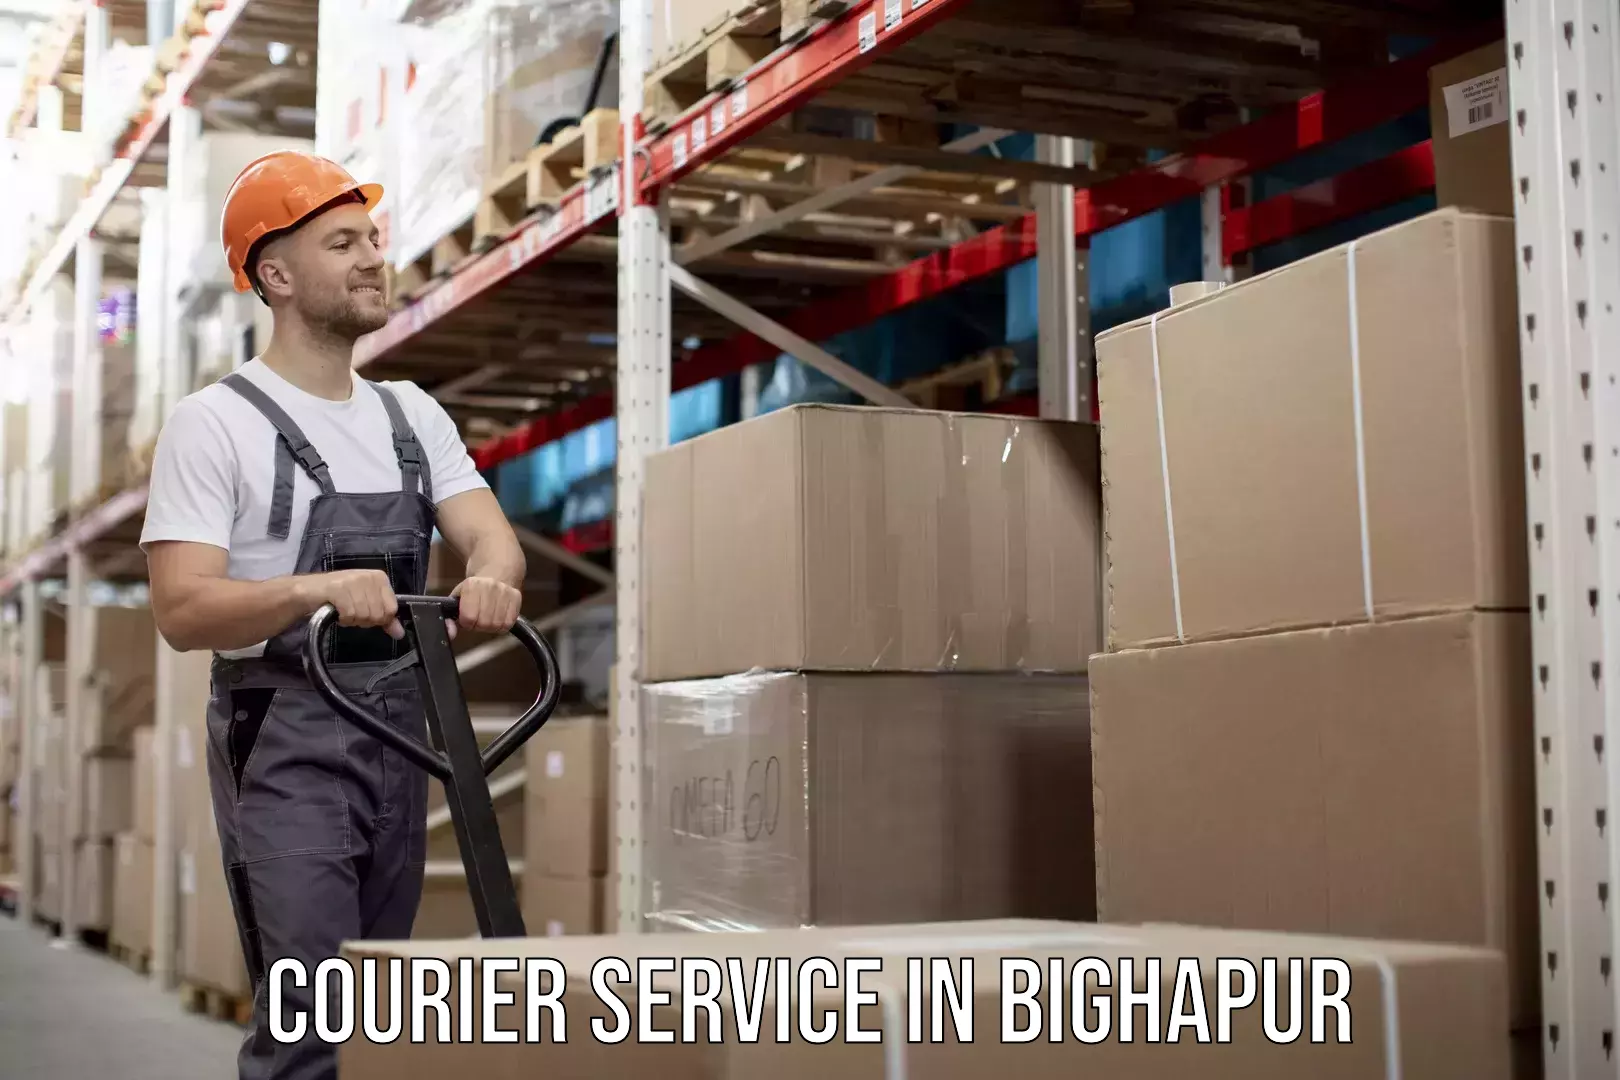 Comprehensive delivery network in Bighapur